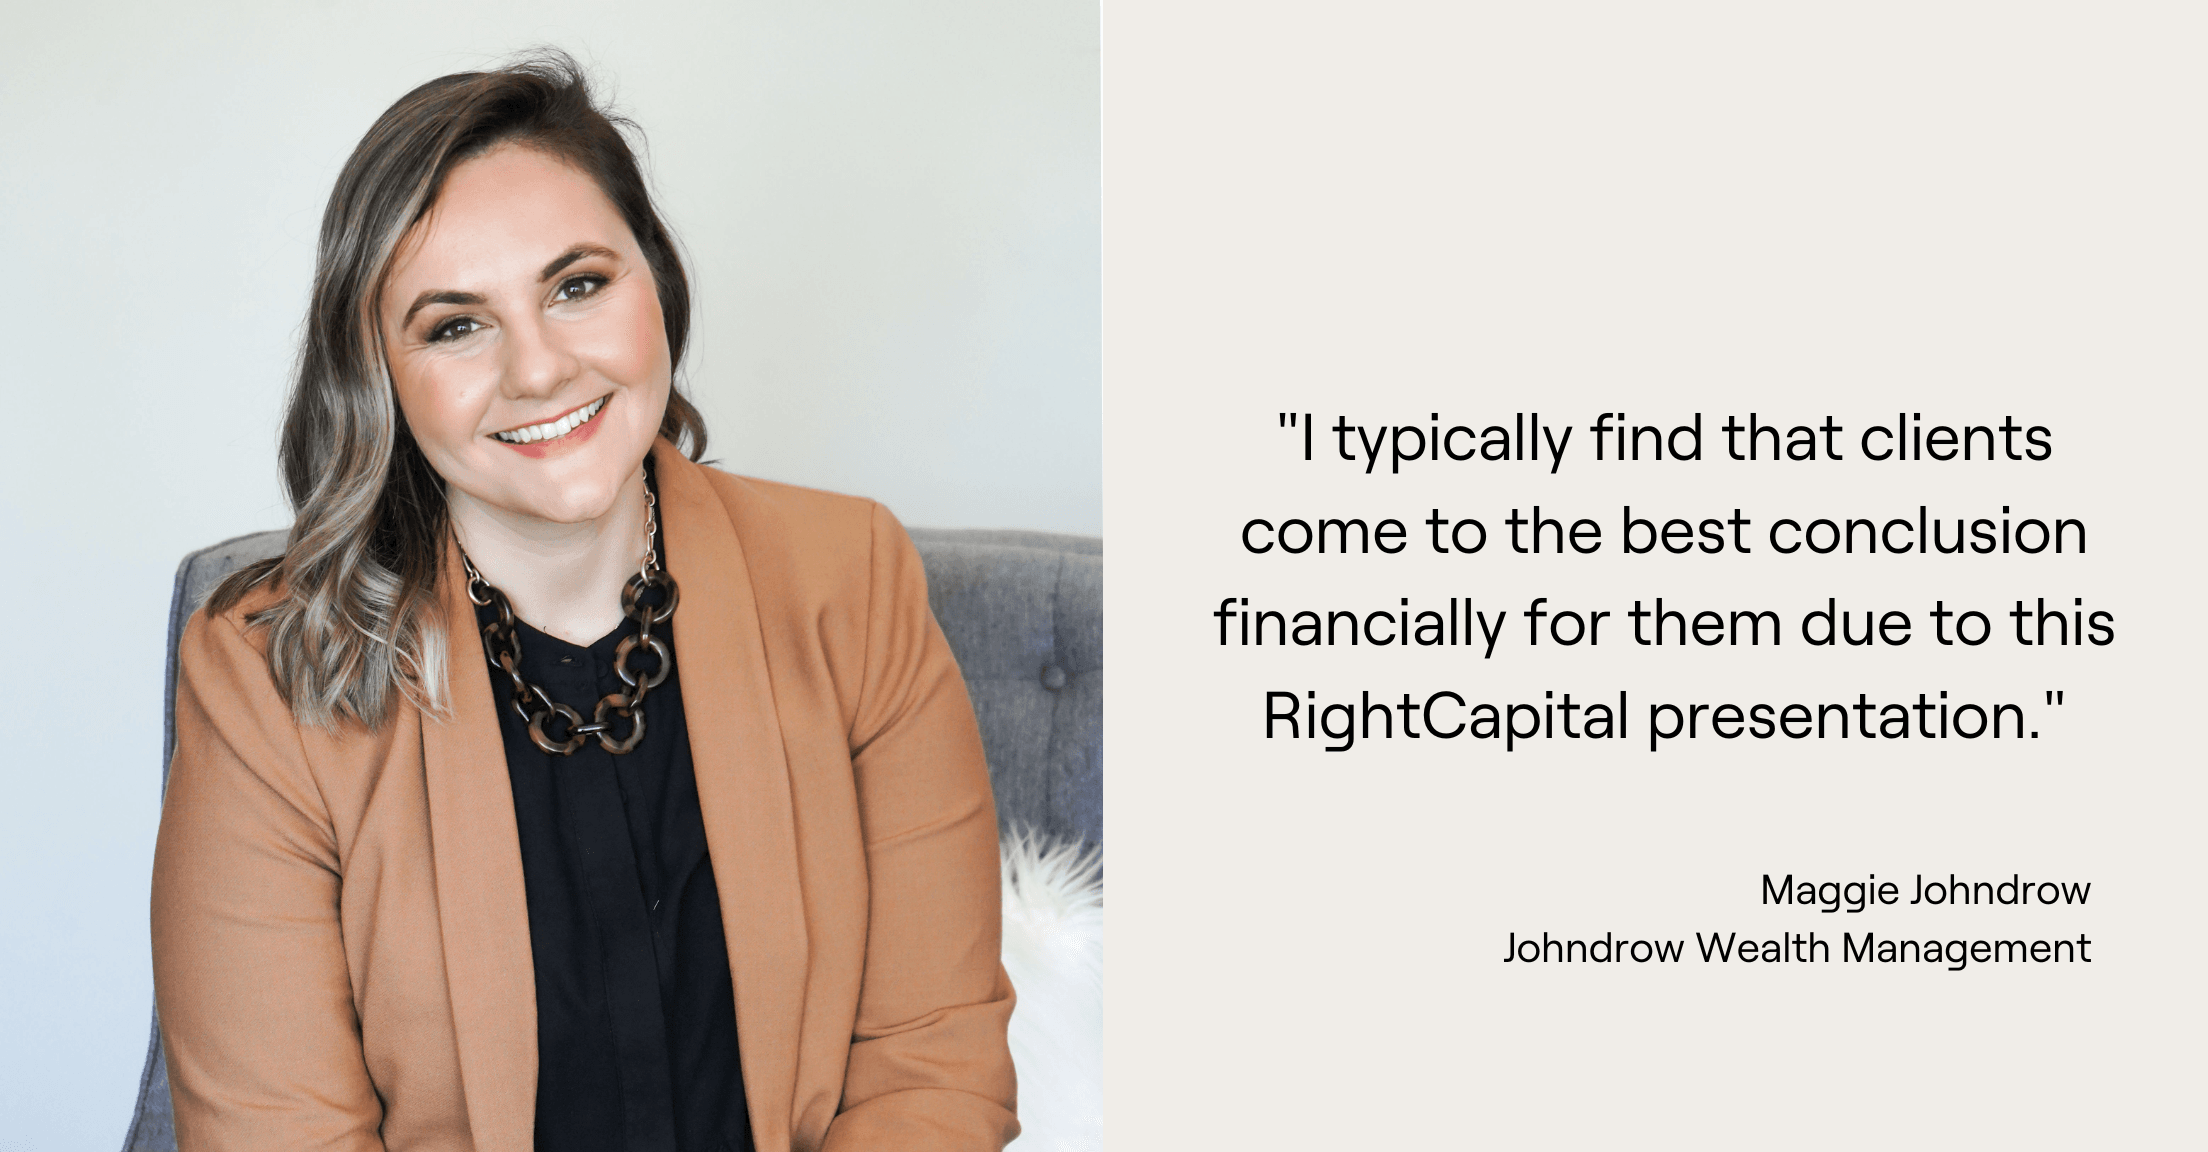 Maggie Johndrow quote, "I typically find that clients come to the best conclusion financially for them due to this RightCapital presentation."